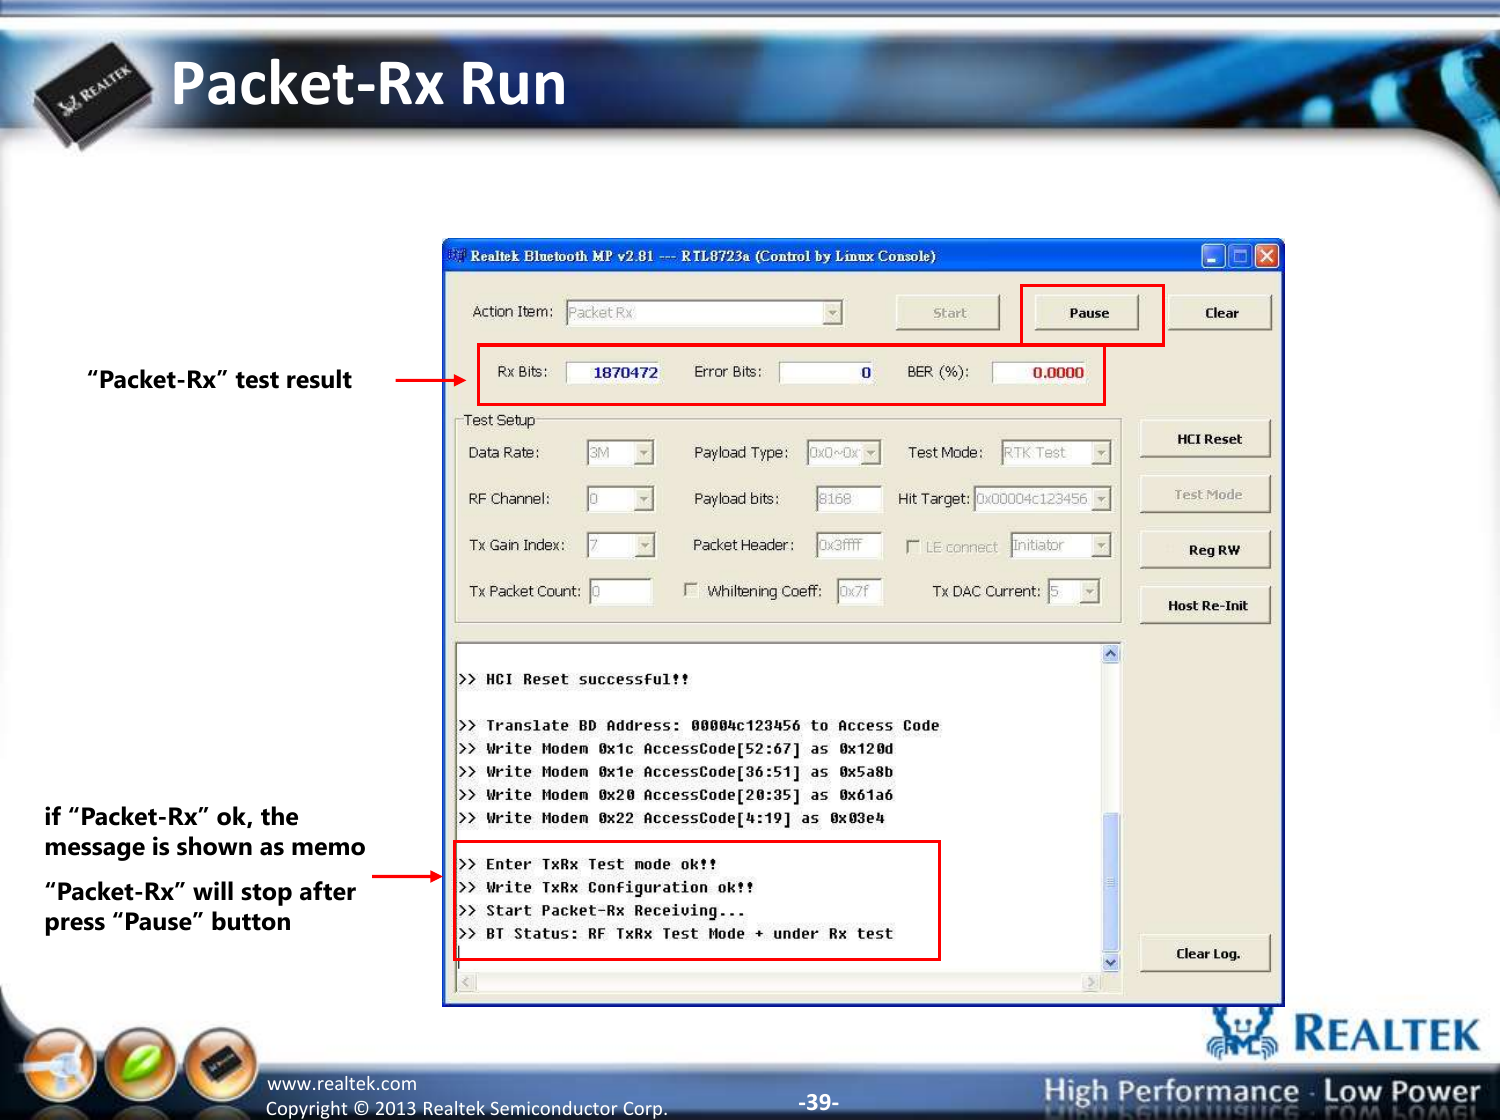 -39- Copyright ©  2013 Realtek Semiconductor Corp. www.realtek.com Packet-Rx Run if “Packet-Rx” ok, the message is shown as memo “Packet-Rx” will stop after press “Pause” button  “Packet-Rx” test result 